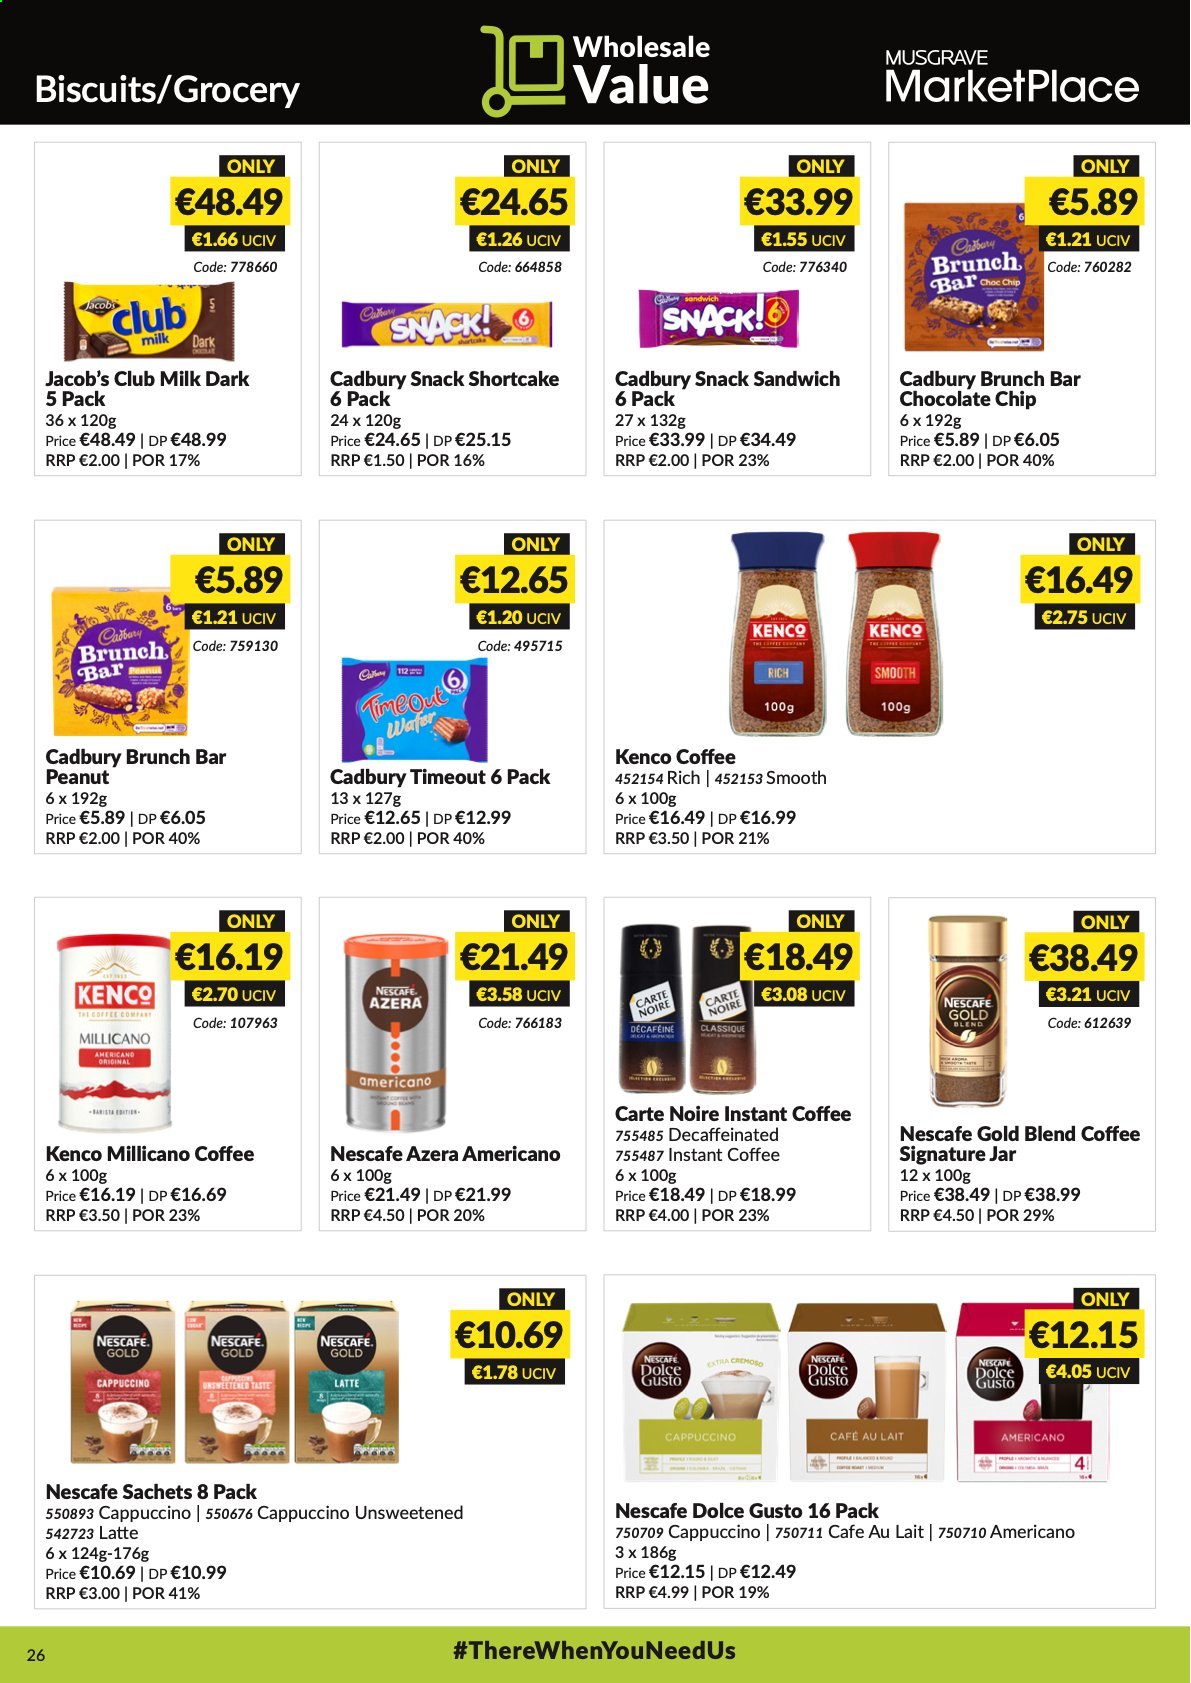 thumbnail - MUSGRAVE Market Place offer  - 06.06.2021 - 03.07.2021 - Sales products - sandwich, wafers, chocolate chips, snack, biscuit, club milk, Cadbury, cappuccino, instant coffee, Nescafé, Dolce Gusto. Page 26.